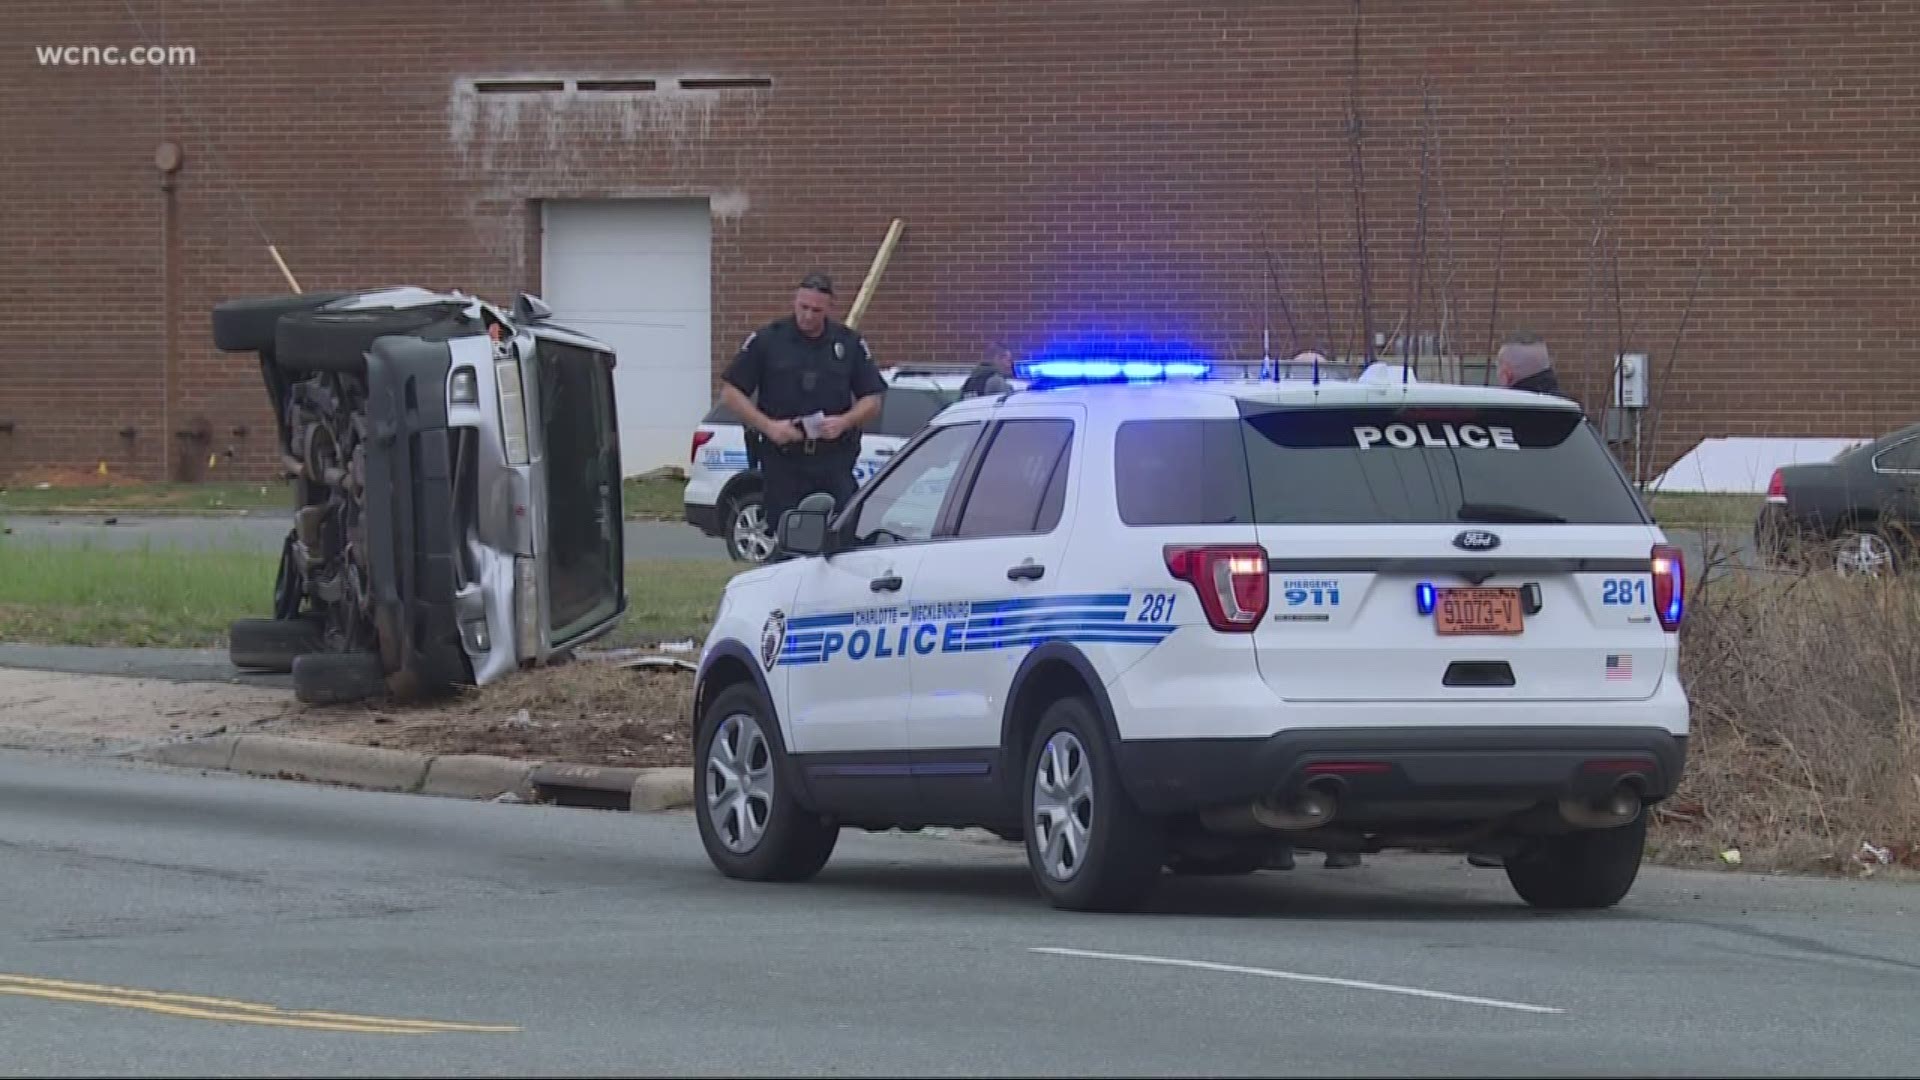 A man was taken into custody after police said he followed a woman to an east Charlotte police station after a domestic dispute.